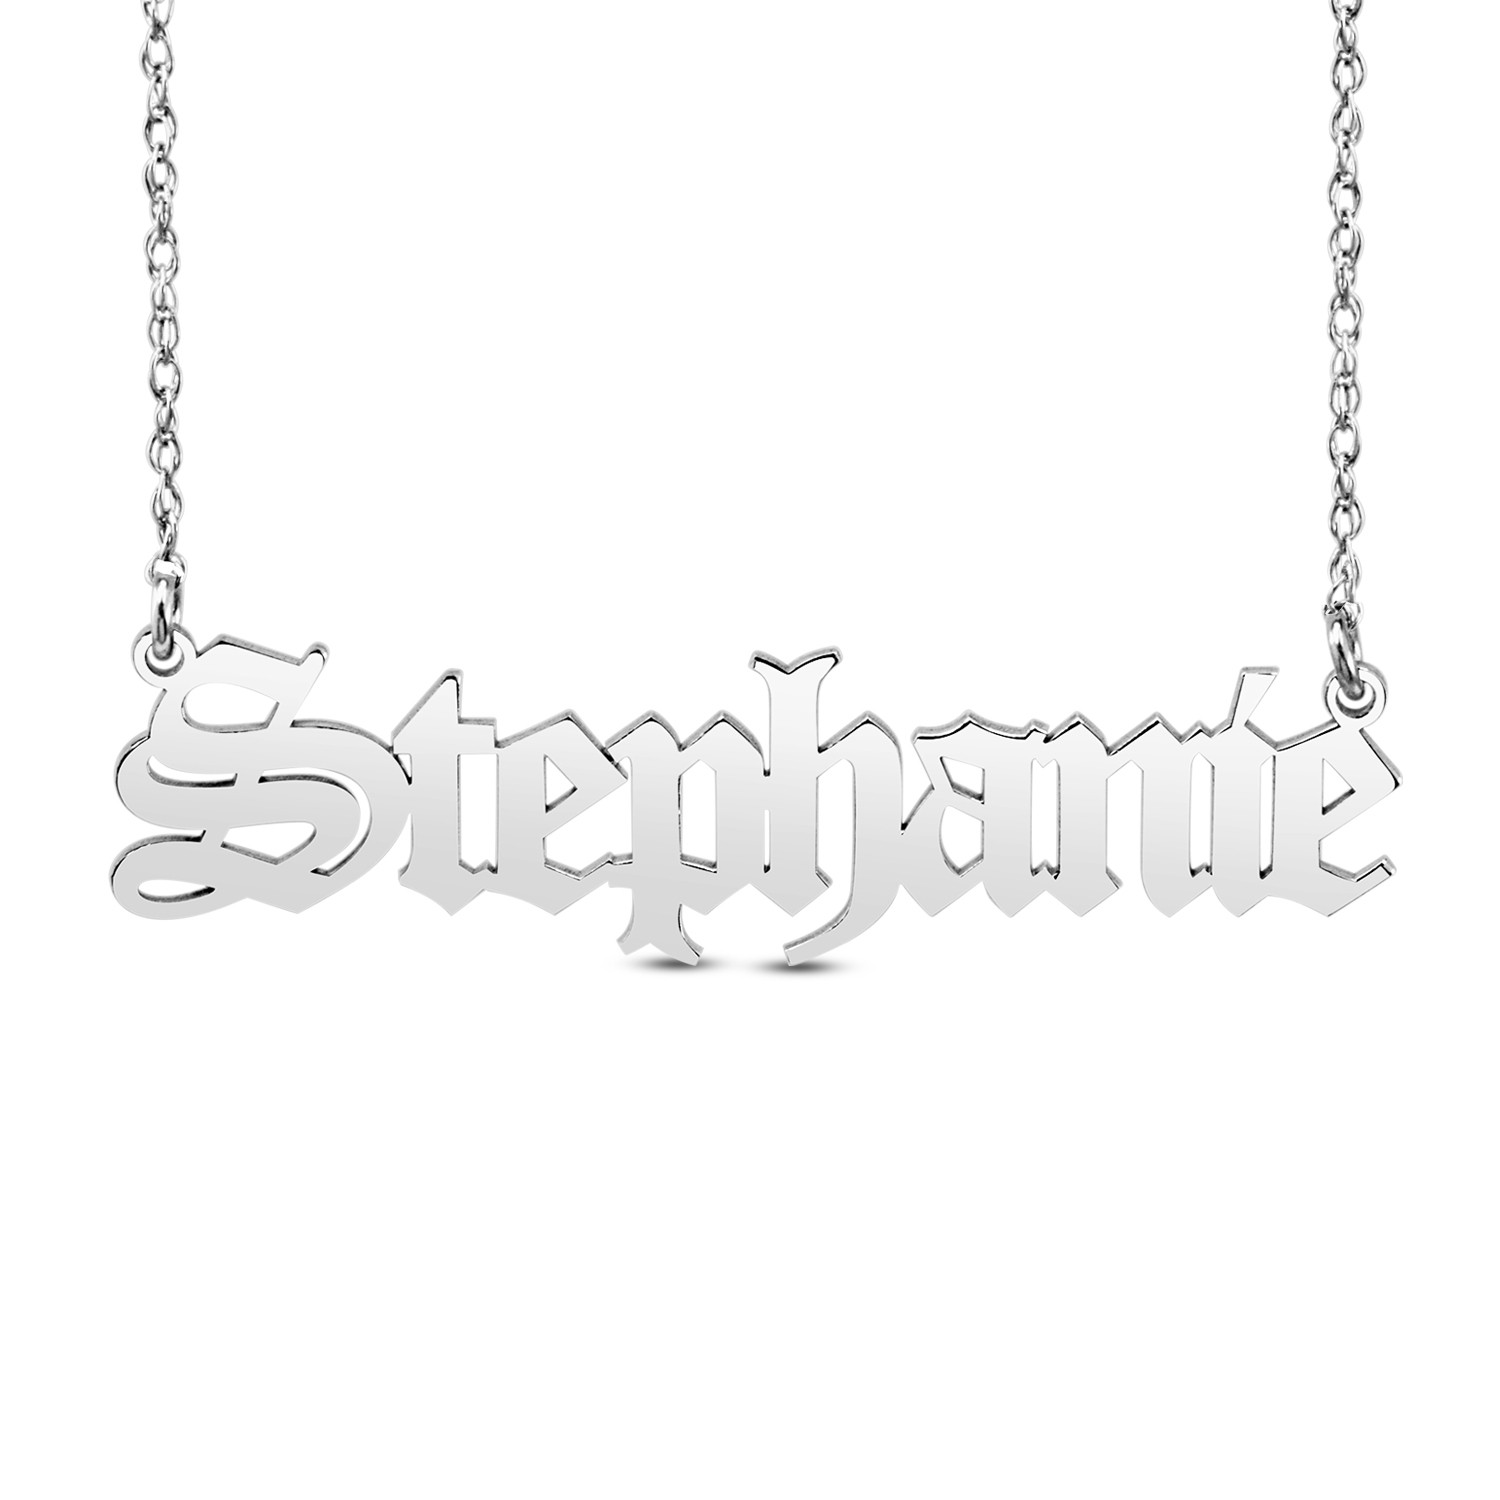 HI Polish Name Pers Necklace - 9 letter max 1 Uppercase letter (Example: Stephanie S=8.02mm x 1.84" e=6.77mm)